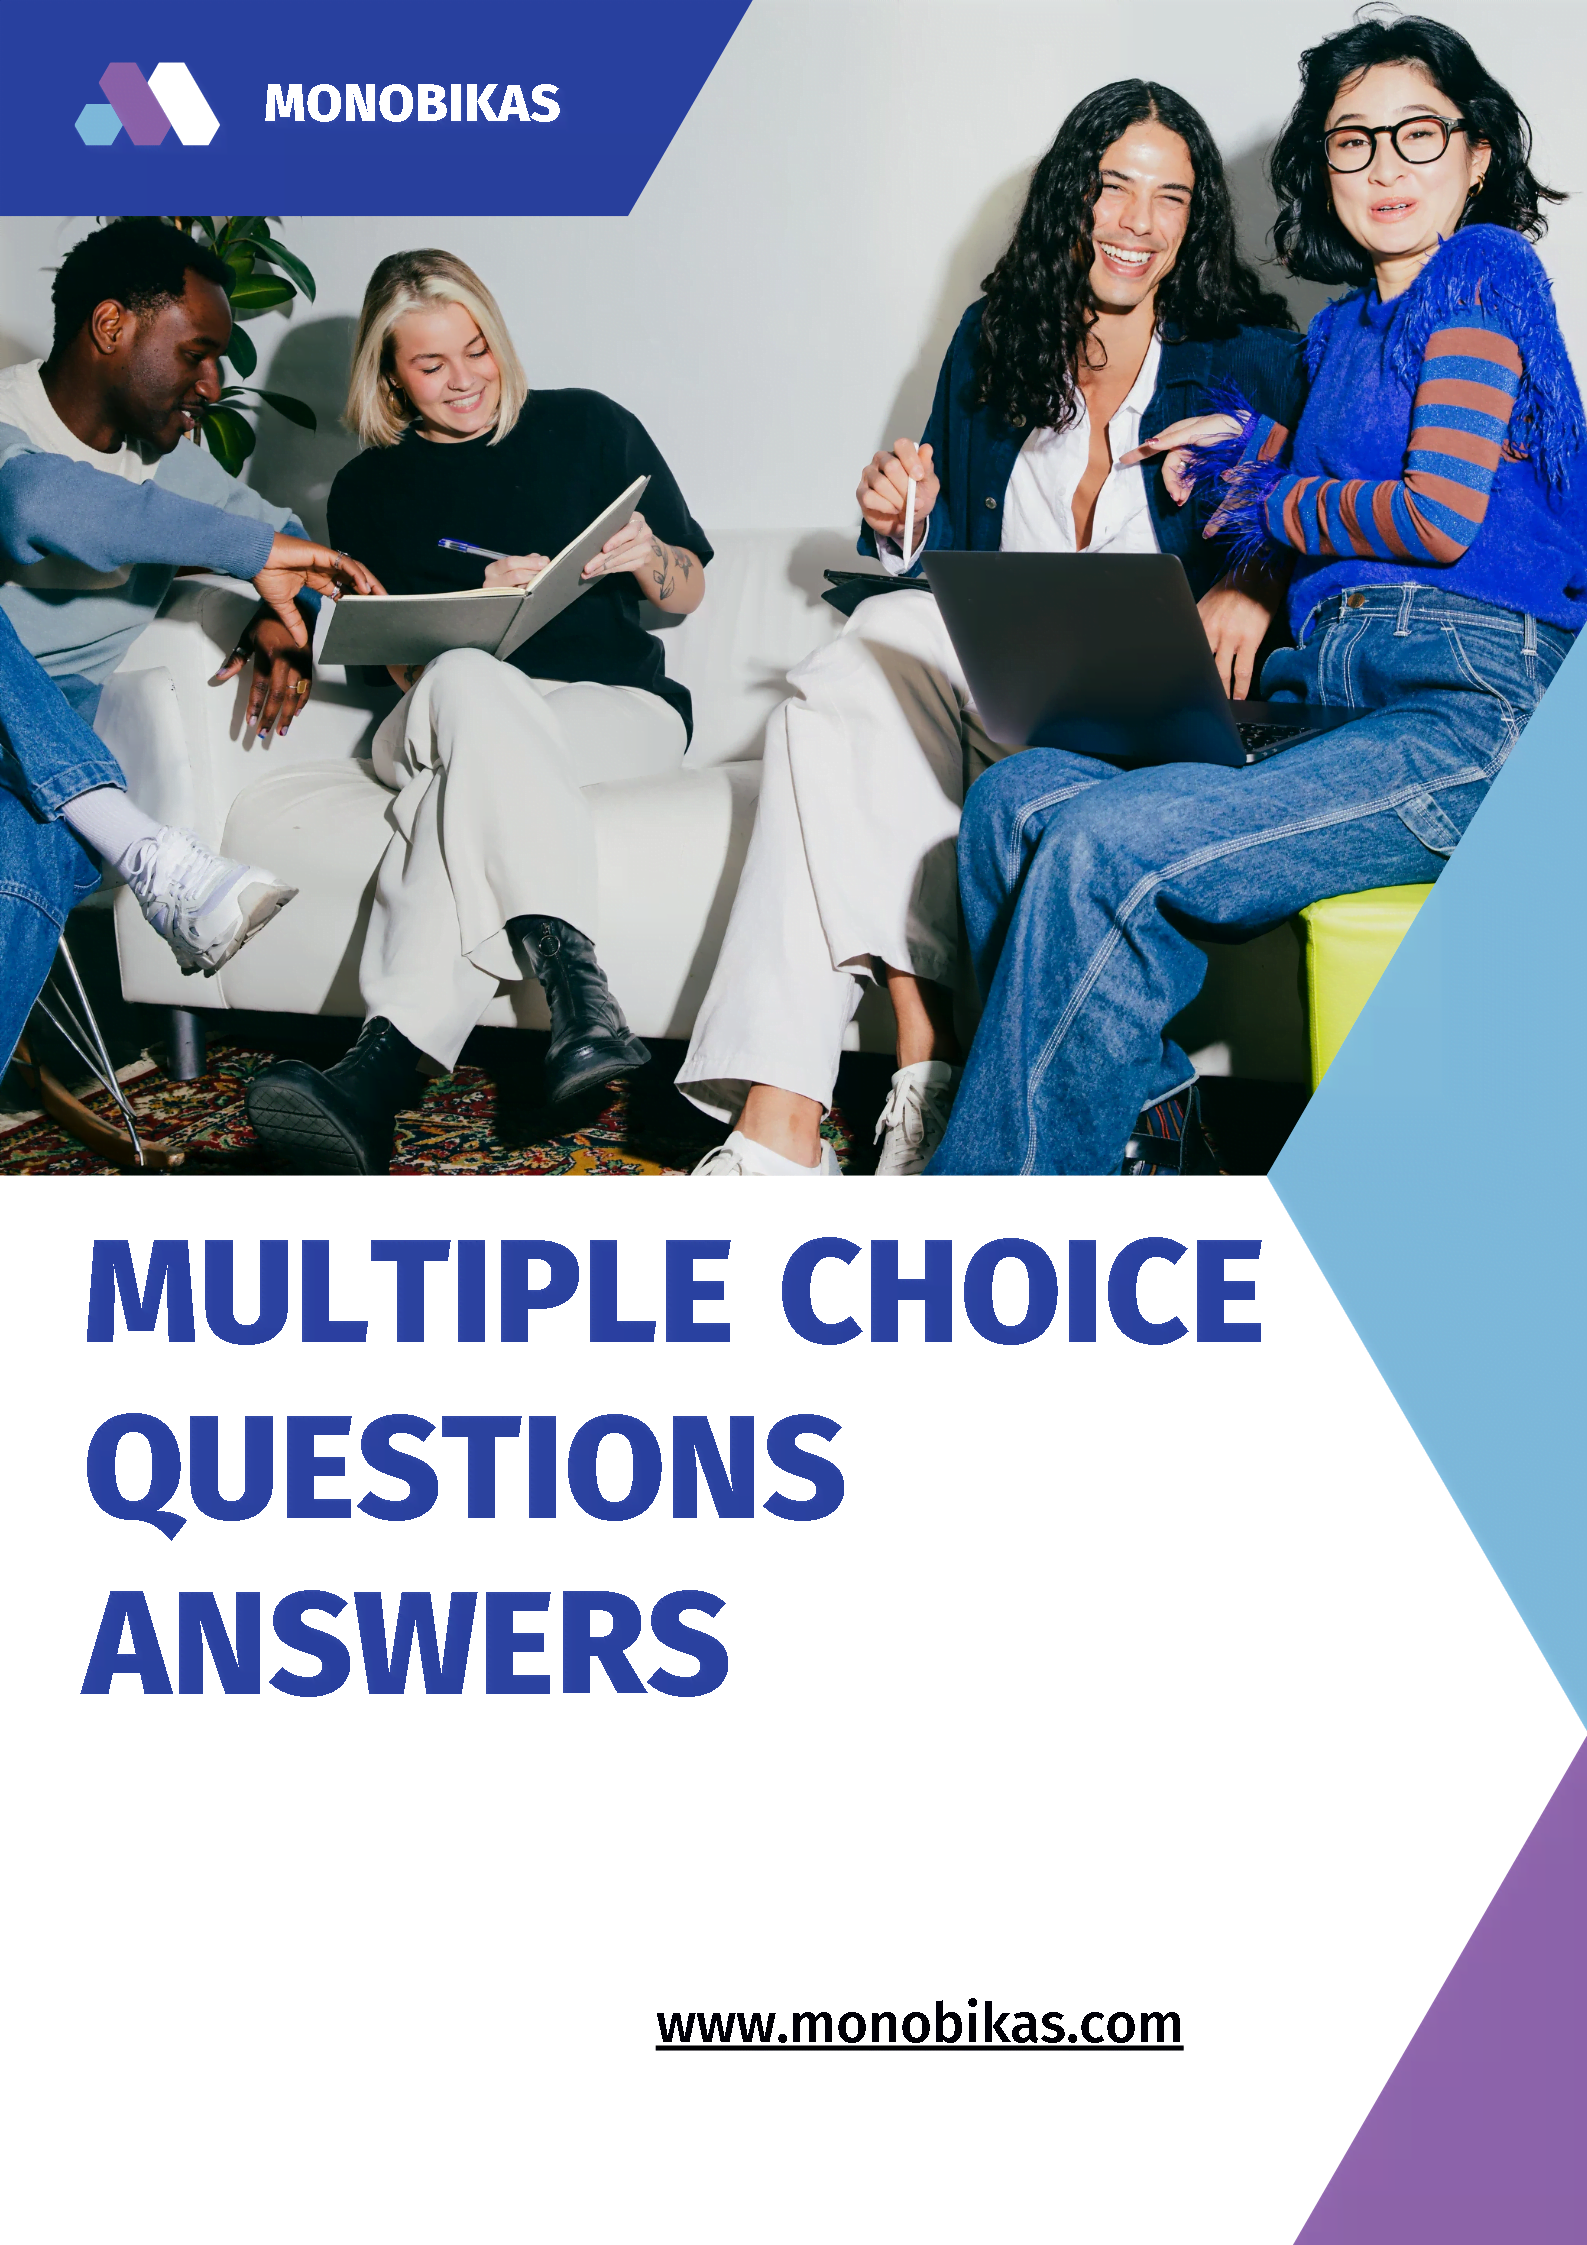 Multiple CHOICE QUESTIONS ANSWERS